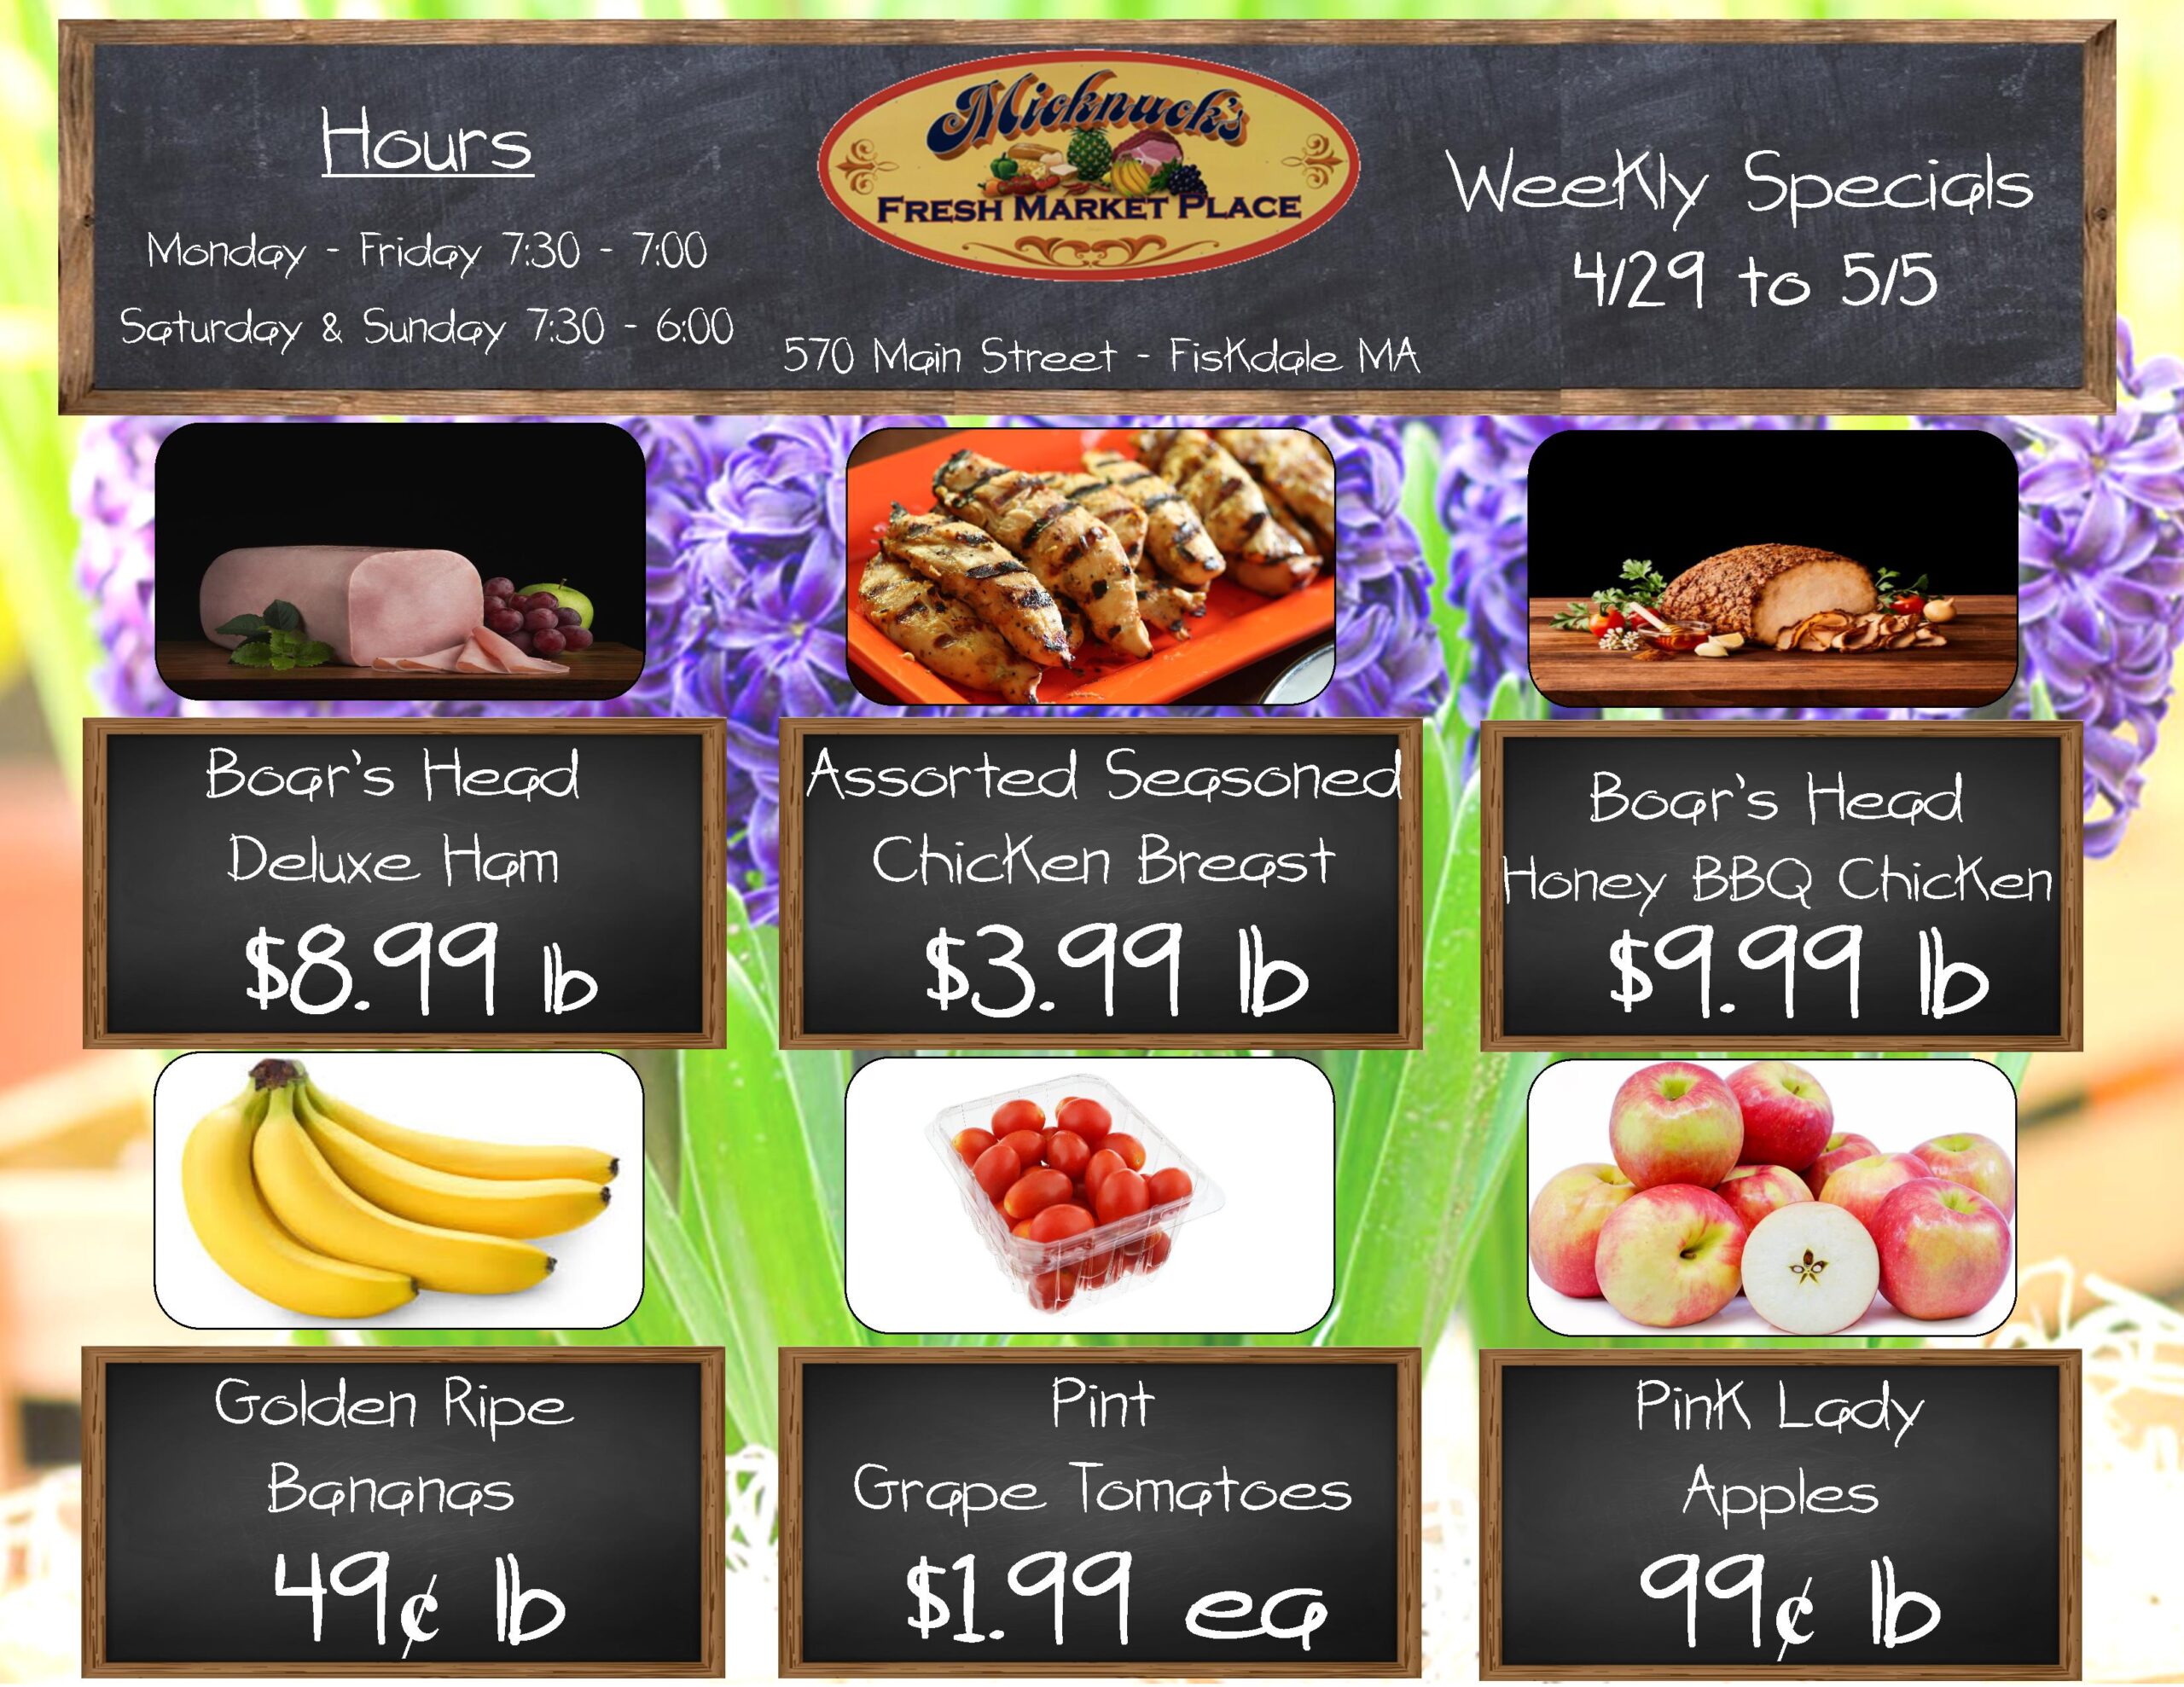 Weekly specials 4/29 to 5/5. 
Boars head deluxe ham $8.99 a lb
Assorted seasoned chicken breast $3.99 a lb. 
Boards head honey bbq chicken $9,99 a lb
Golden Ripe bananas 49 cent a lb
pint grape tomatoes $1.99 each
Pink lady apples 99 cent a lb